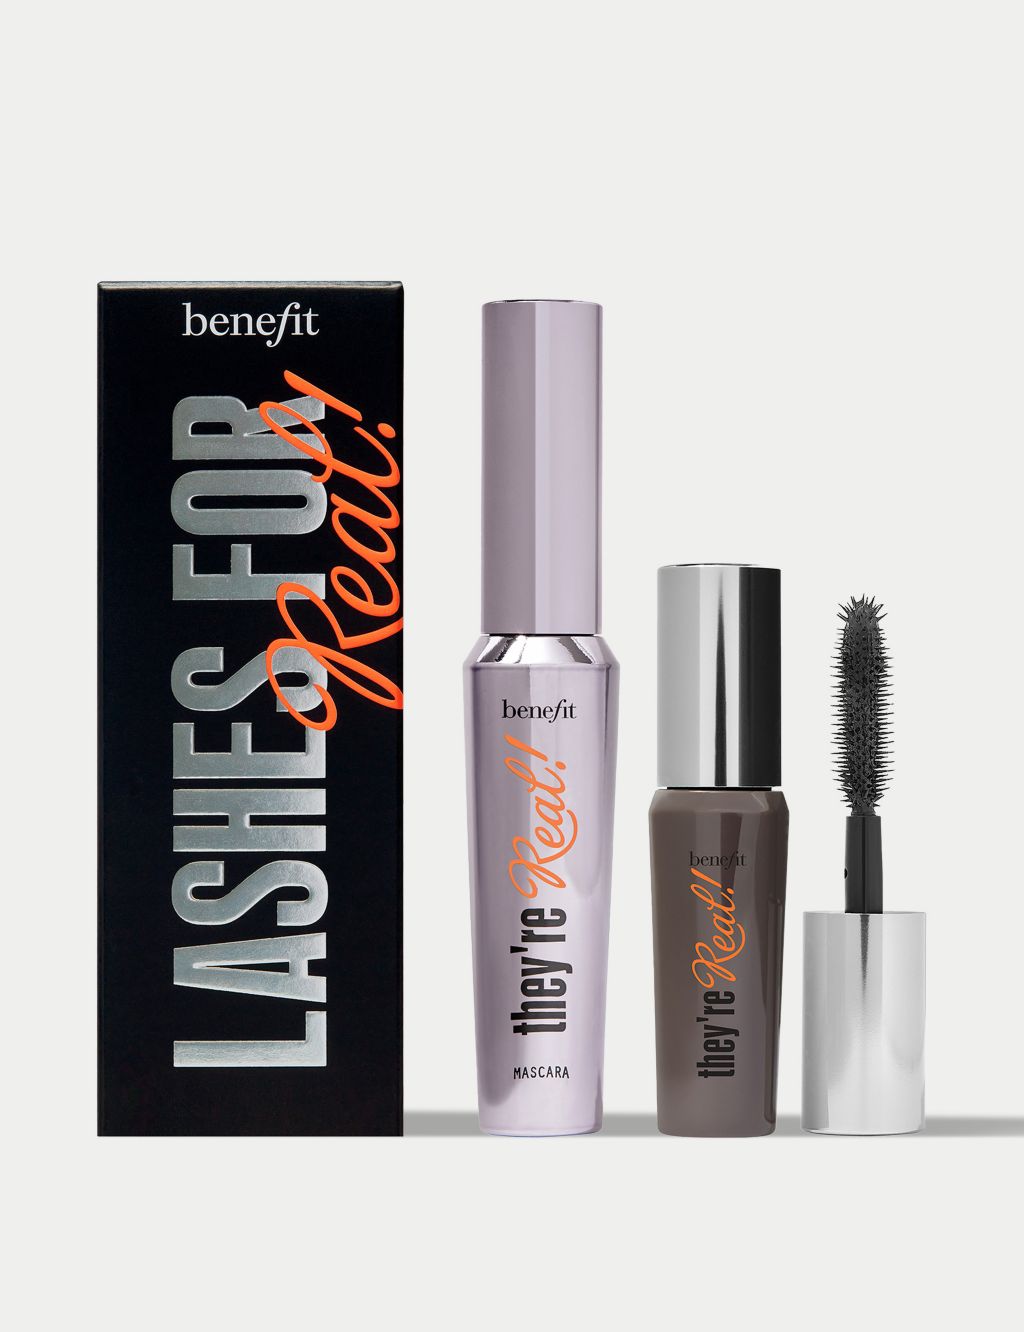 Lashes for Real! They’re Real Mascara Booster Set worth £42 12.5g